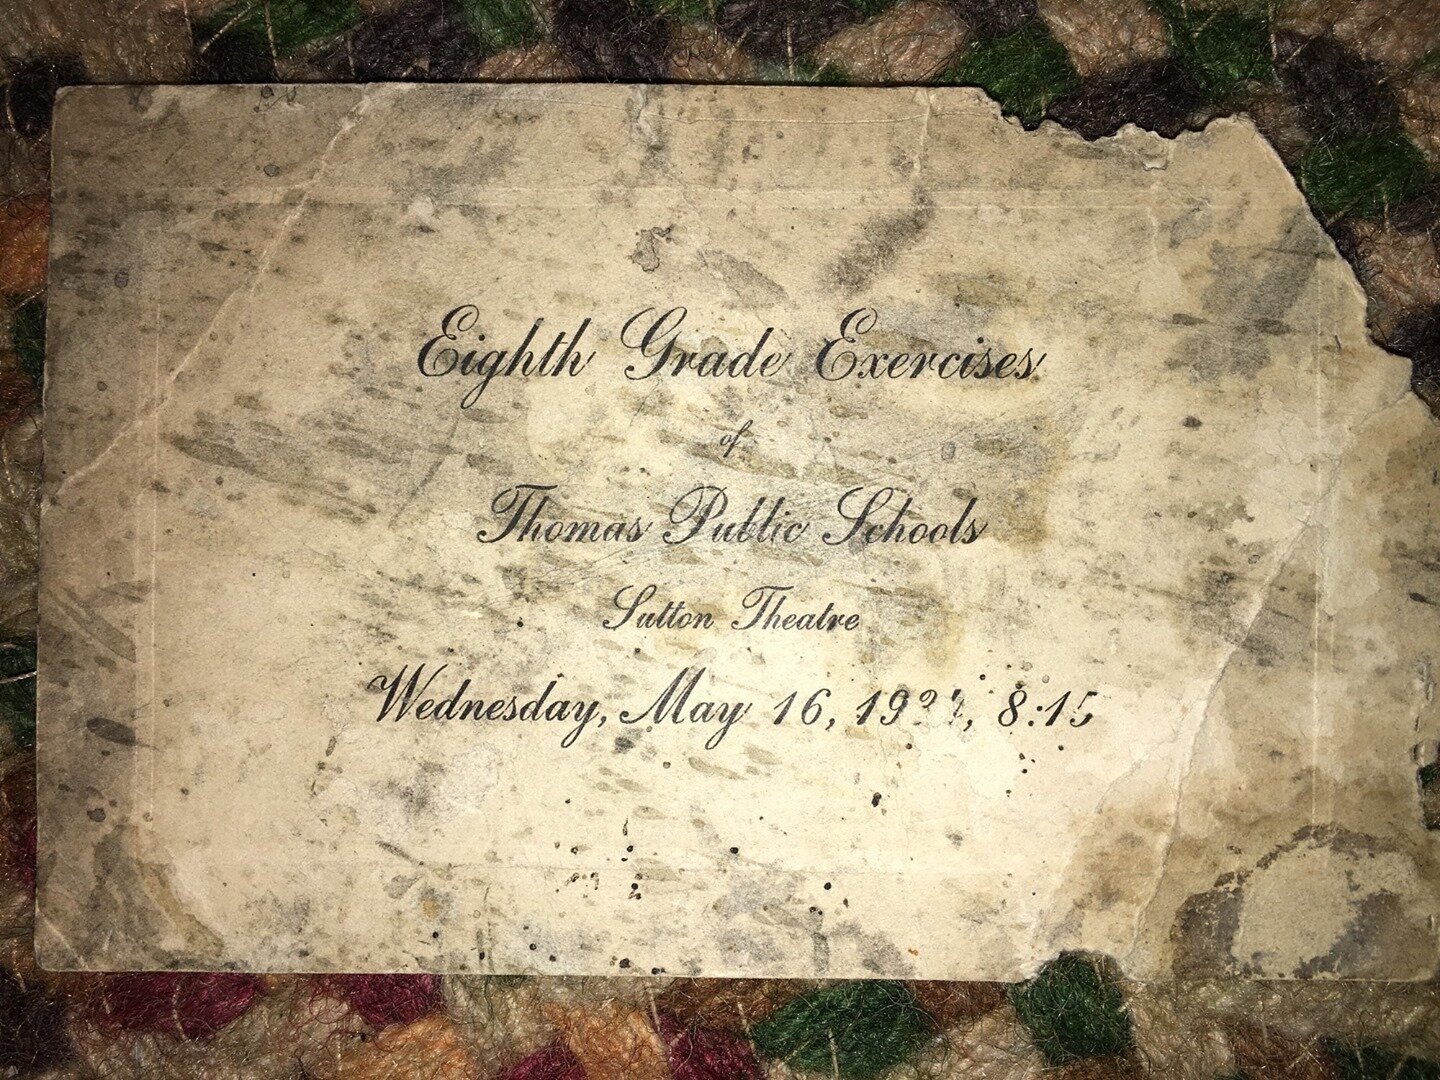 On this night in 1934, the public school system in Thomas held its eighth grade commencement exercises at Sutton Theatre (a.k.a., Cottrill&rsquo;s Opera House).

Invitation card courtesy of Mary Milkint.